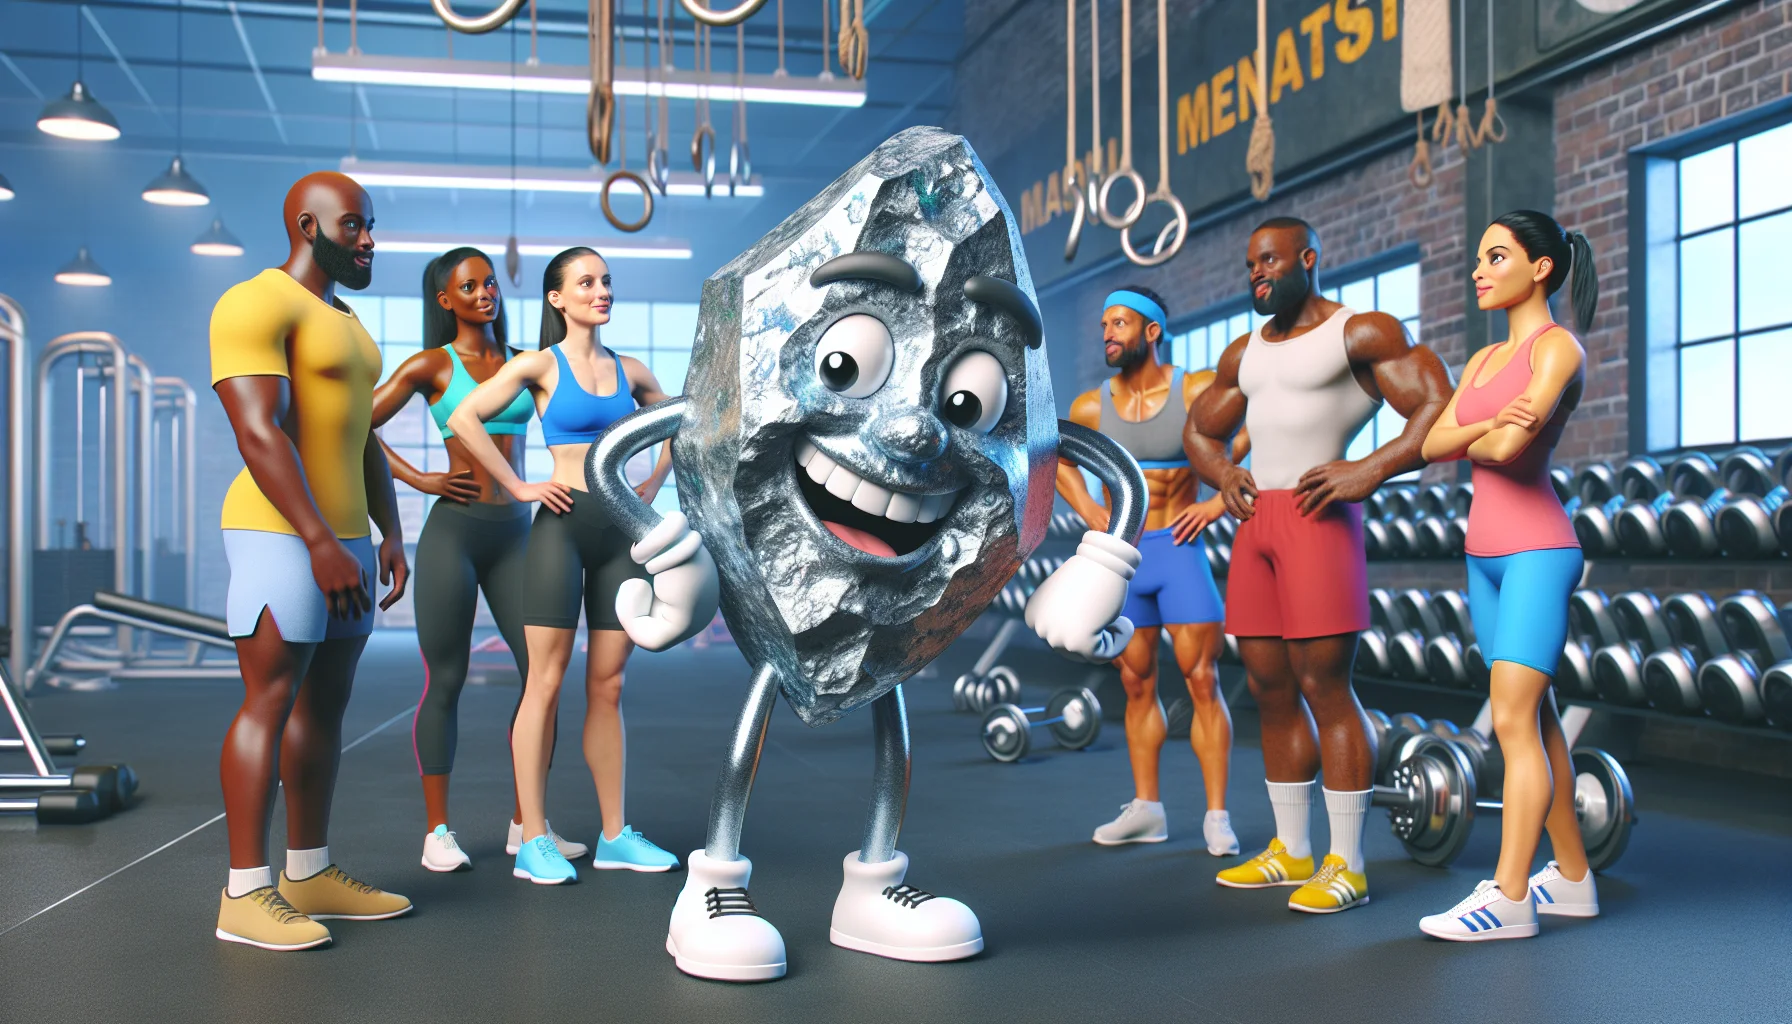 Create a humorous, realistic image depicting the scenario where magnesium perchlorate, represented as a jovial animated character, is seen promoting the benefits of using supplements for sports. The character has a shiny, rocky, and crystalline form to reflect its chemical nature. It should be seen interacting in a friendly way with a diverse group of athletes including a female Black marathon runner, a male Caucasian weightlifter, and a male Hispanic footballer, each looking intrigued and intrigued by the charismatic magnesium perchlorate character. The background consists of a lively gym setting filled with various sports equipment.